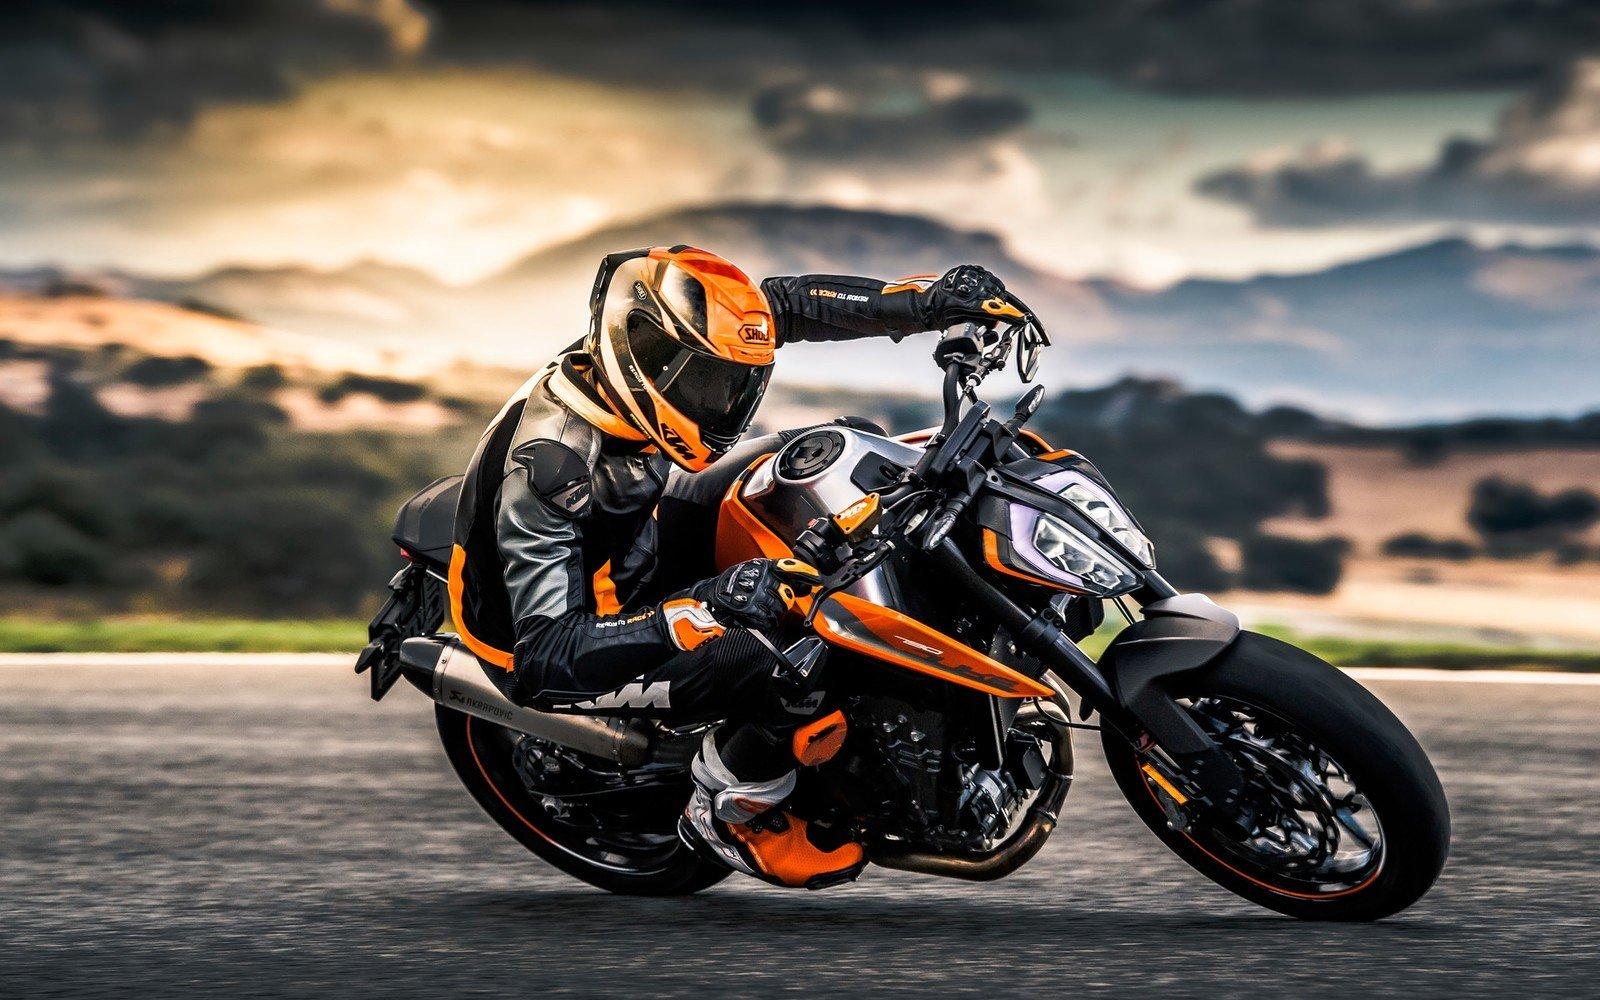 KTM Duke 790 Picture, Photo, Wallpaper And Videos